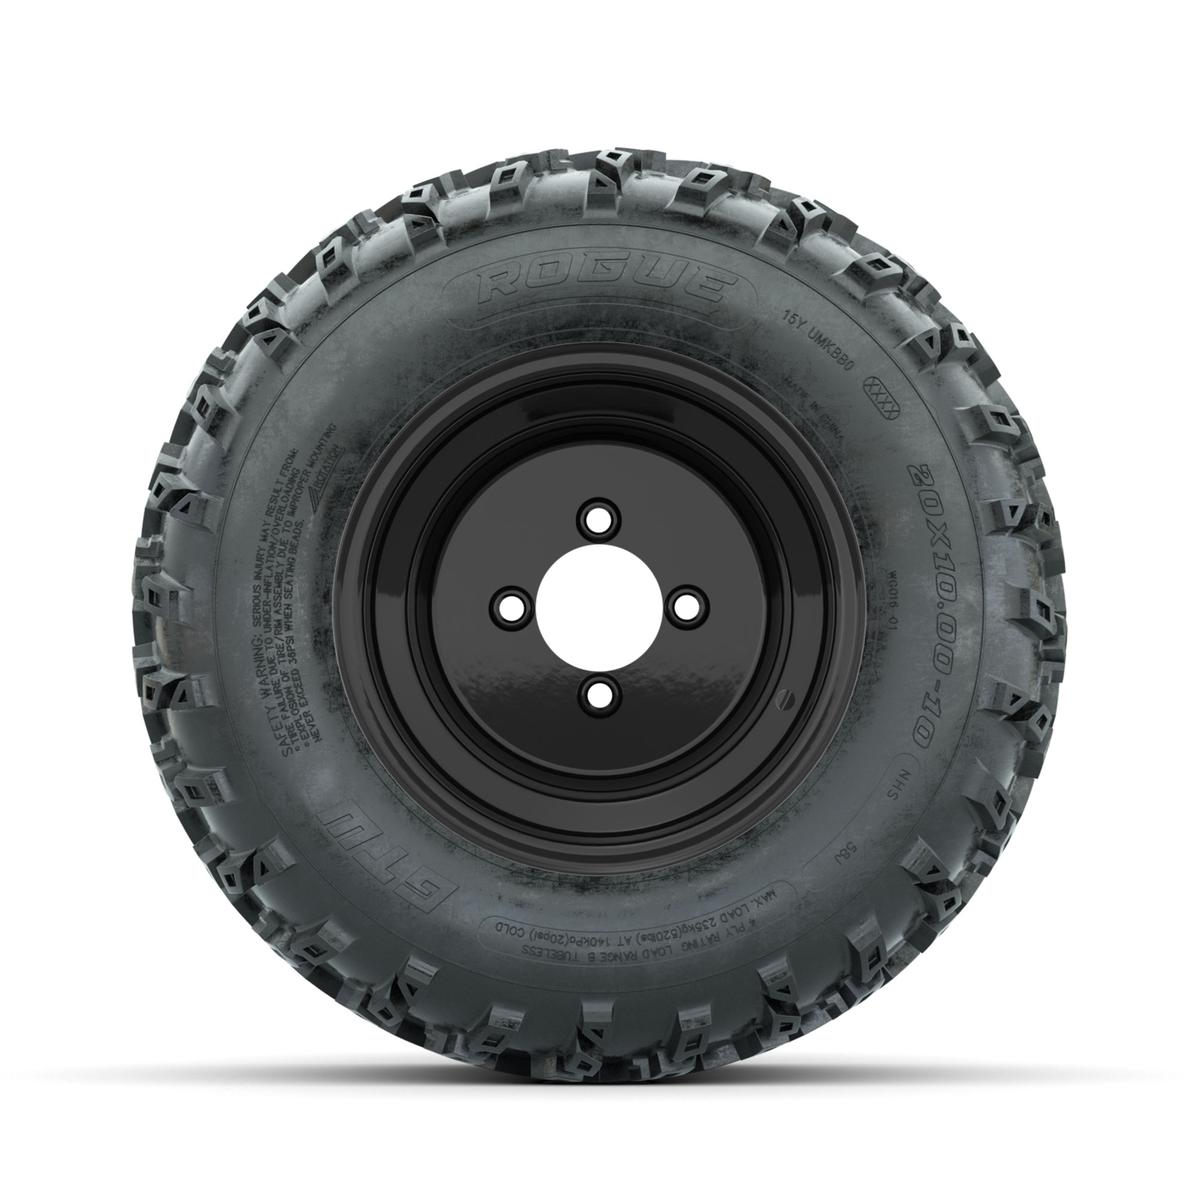 GTW Steel Matte Black 3:5 Offset 10 in Wheels with 20x10.00-10 Rogue All Terrain Tires – Full Set